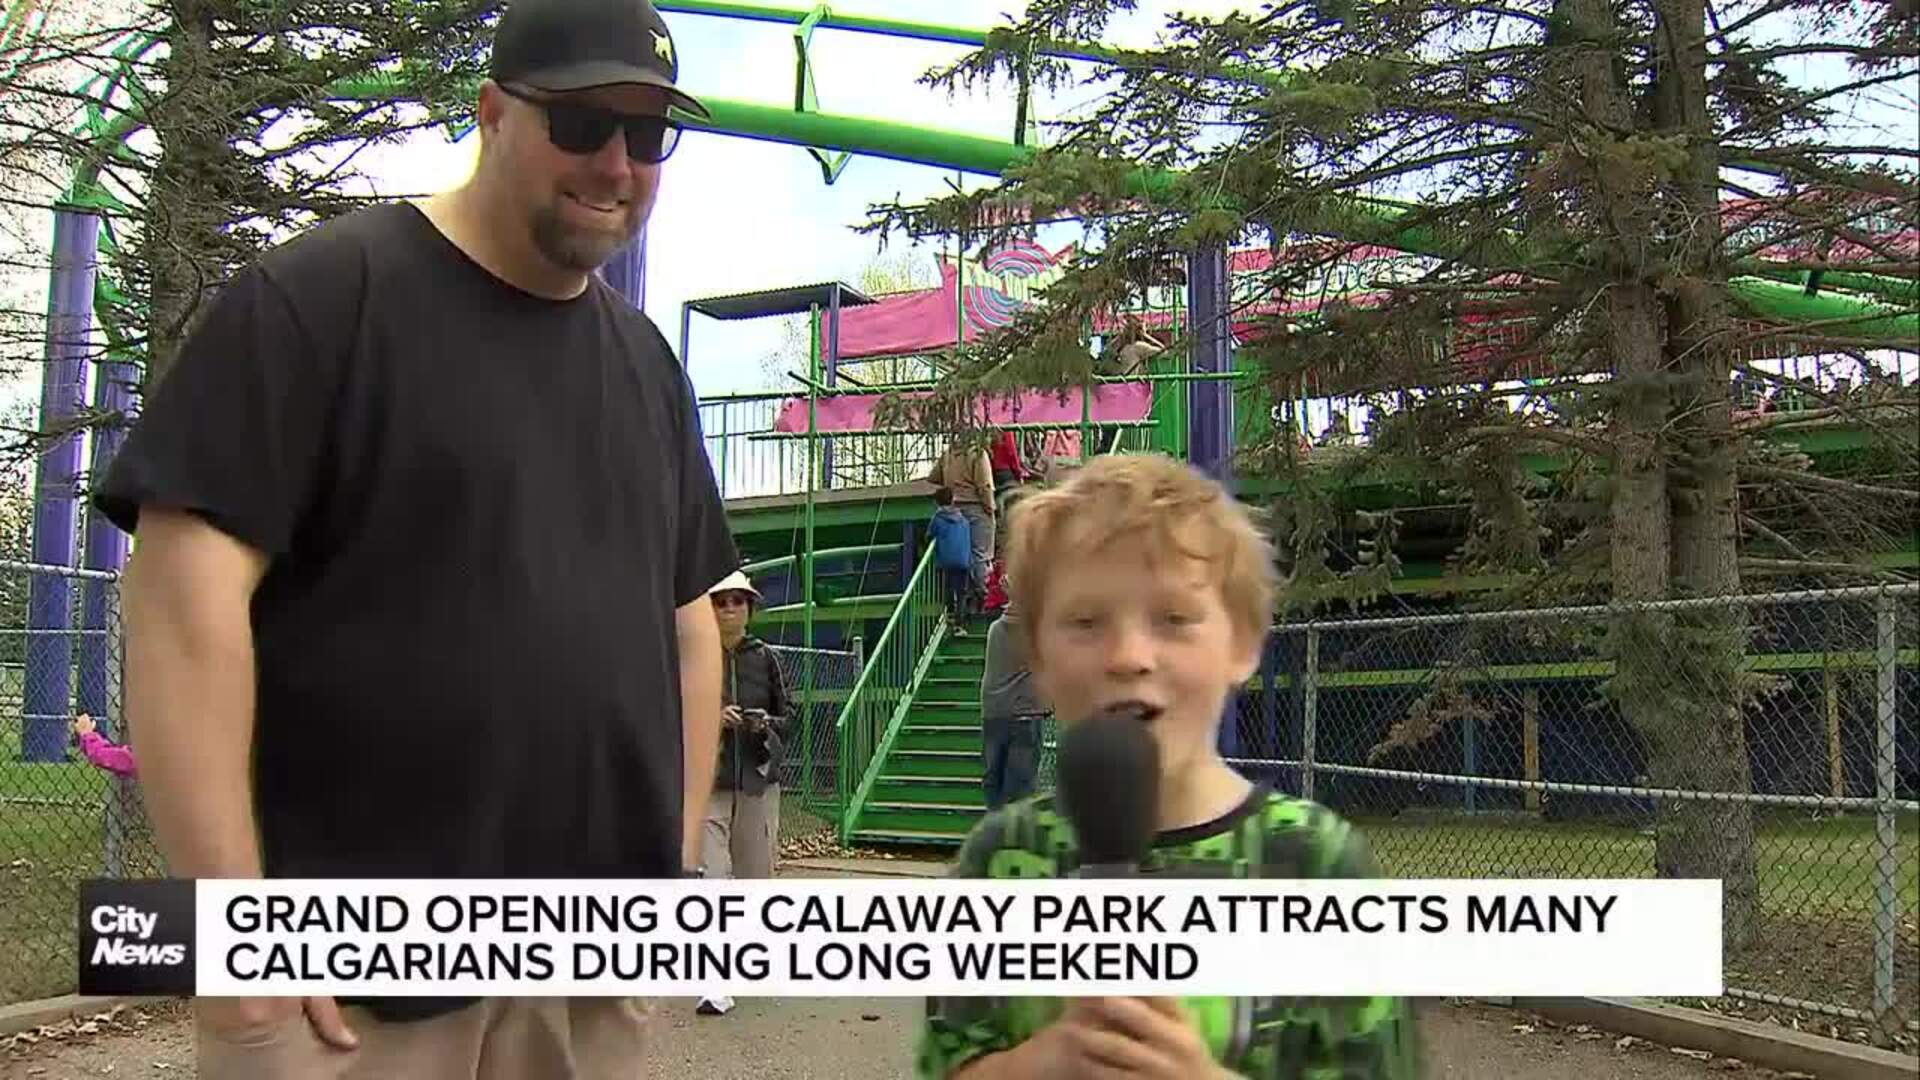 Grand opening of Calaway Park attracts many Calgarians during long weekend